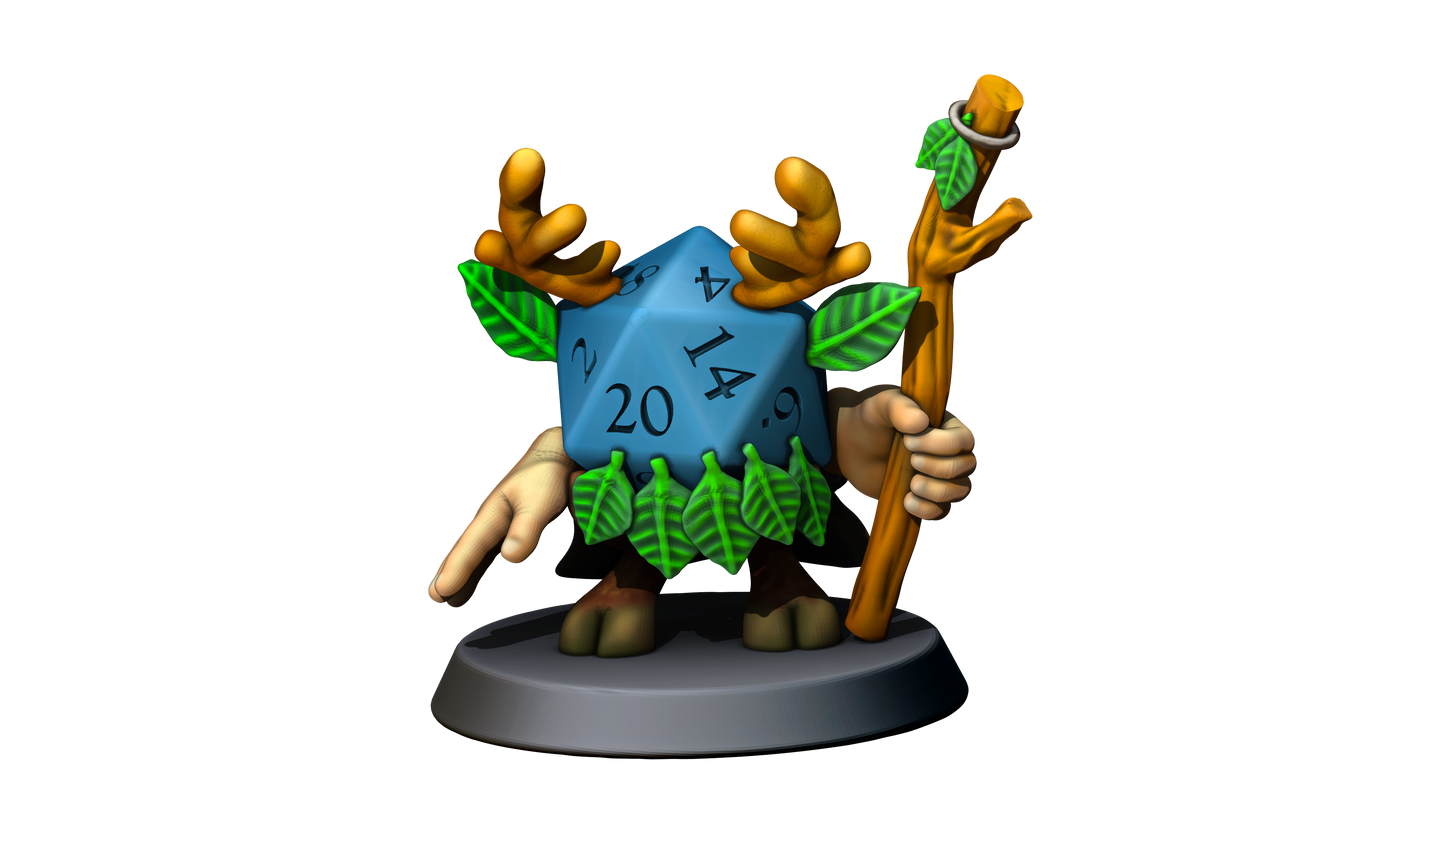 D20 Druid Construct Hero (Small) by Minitaurus for Tabletop Games, Dioramas and Statues, Available in 15mm, 28mm, 32mm, 32mm heroic, 54mm and 75mm Statue Scale